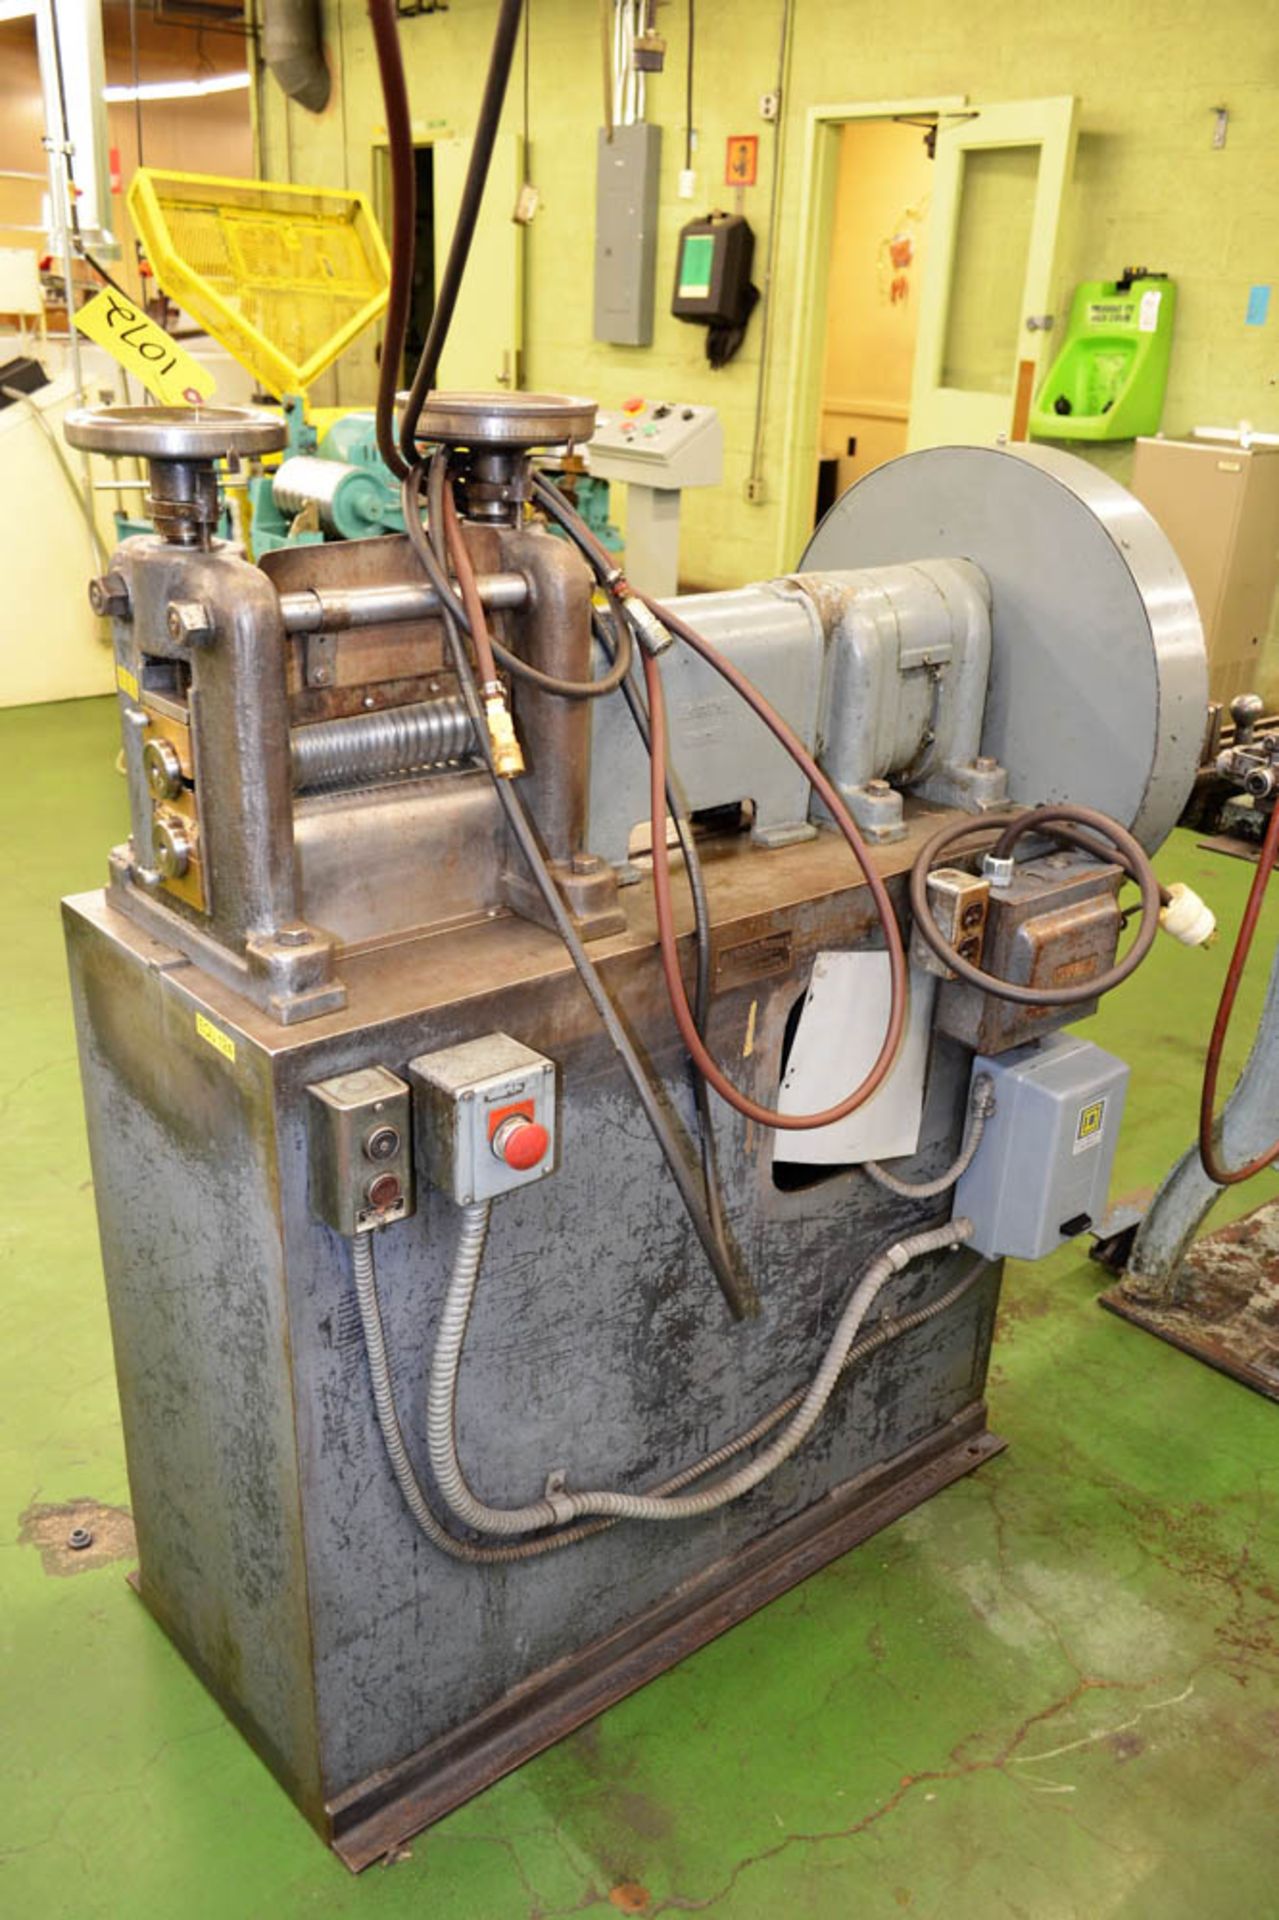 RUESCH MDL. C-37 WIRE ROLLING MILL, WITH 2-1/2" DIAMETER X 9" ROLLS, EXTRA SET OF ROLLS, S/N: 4742 - Image 2 of 2